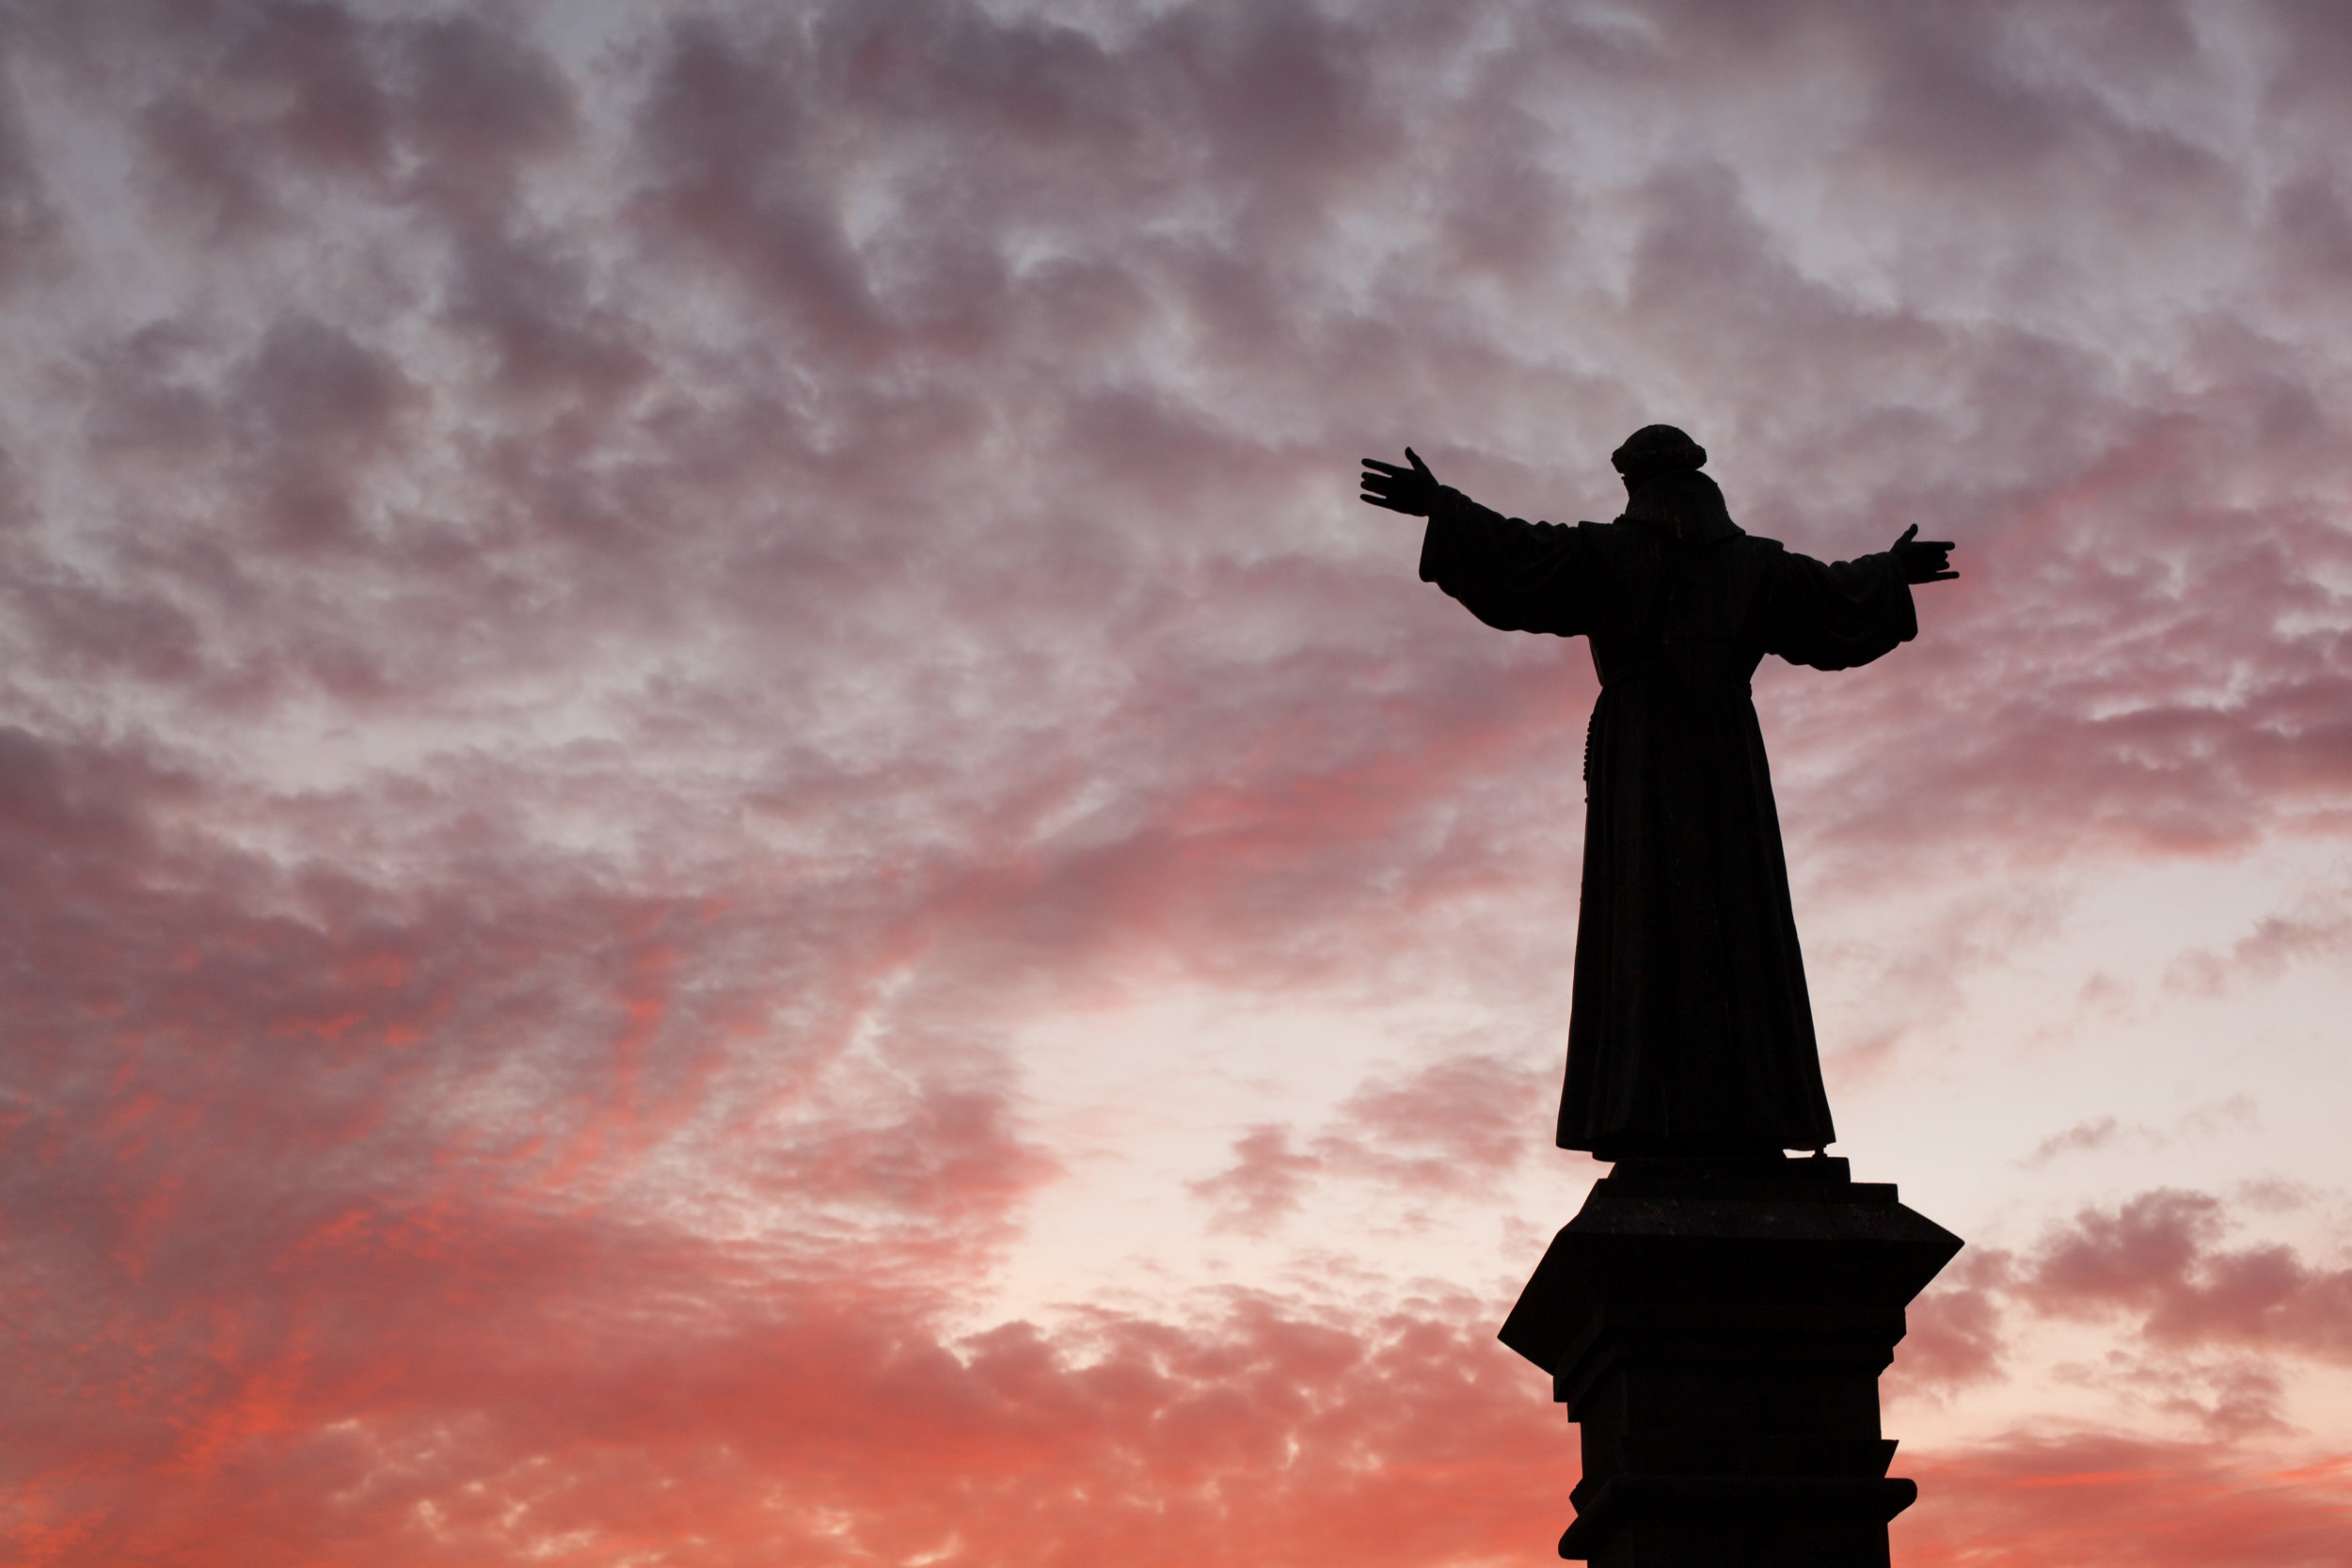 A blood red sky behind a religious statue in Arequipa, Peru.